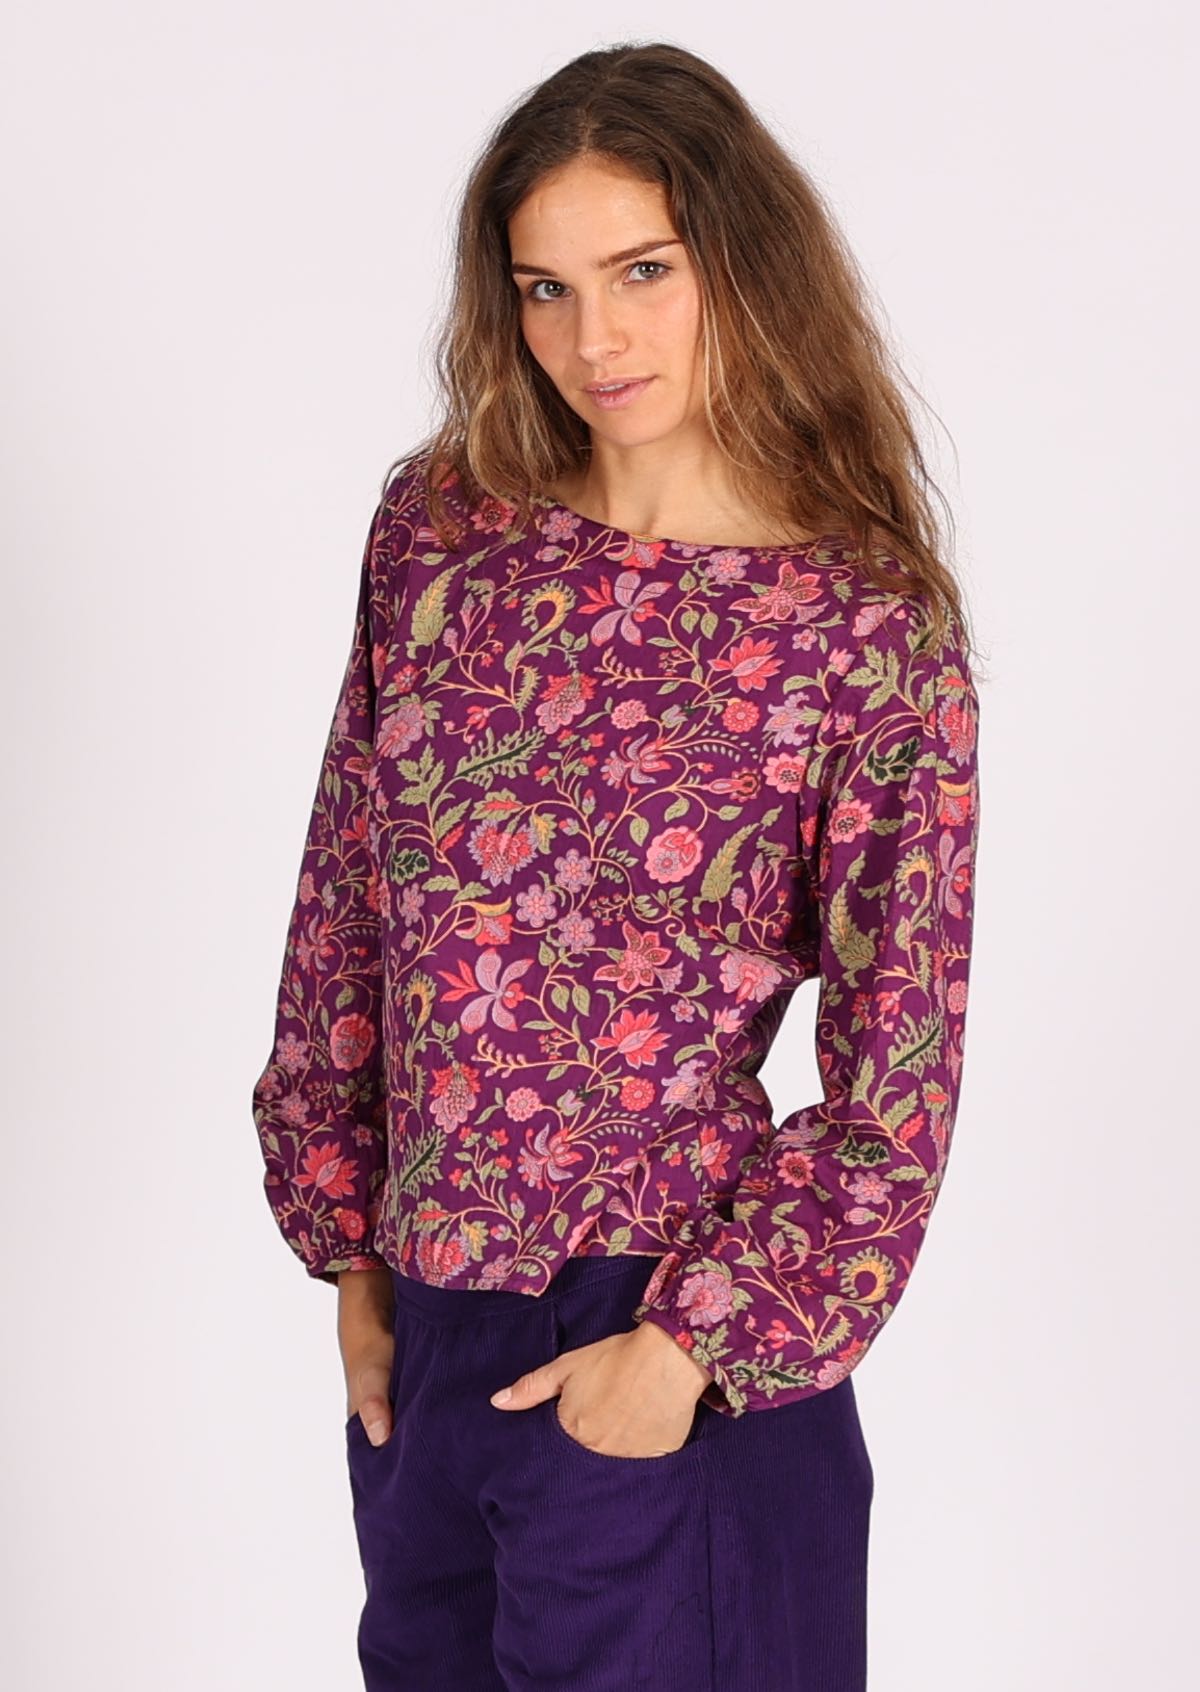 Cotton floral top with bishop sleeves